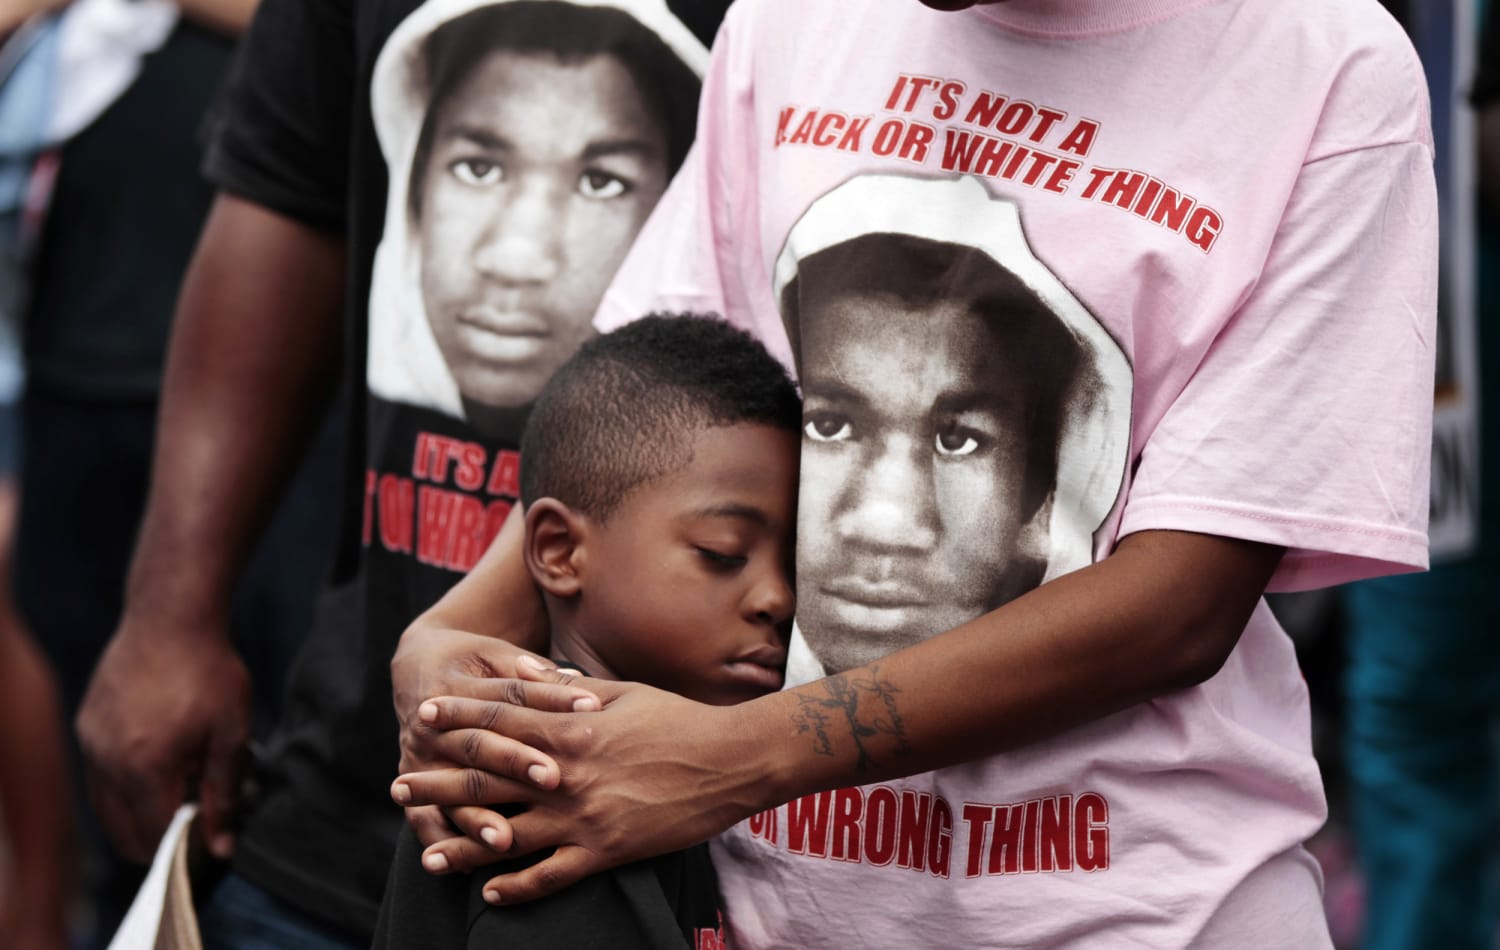 Vis stedet Udlænding Pounding Analysis: Trayvon Martin's Death Still Fuels a Movement Five Years Later